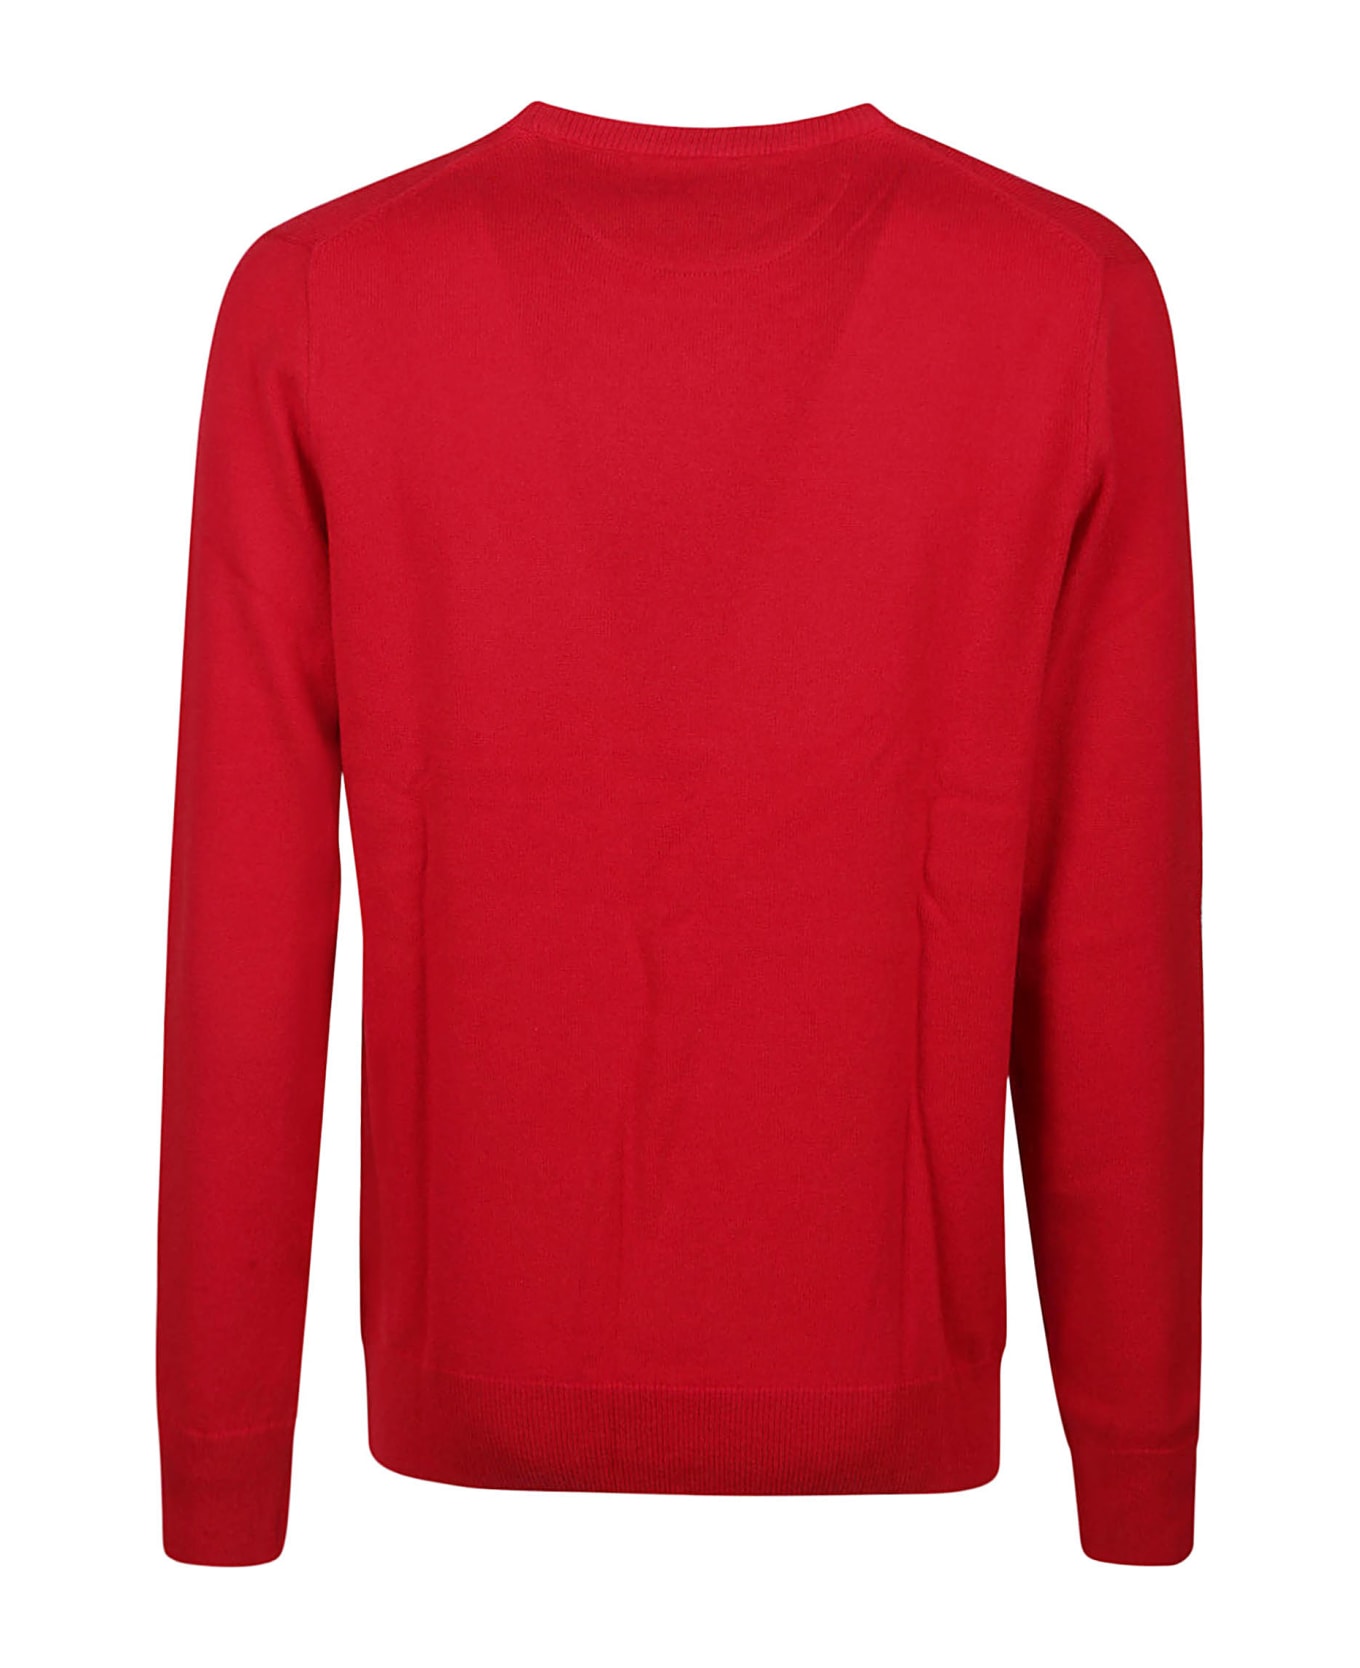 Polo Ralph Lauren Long Sleeve Sweater - Park Ave Red